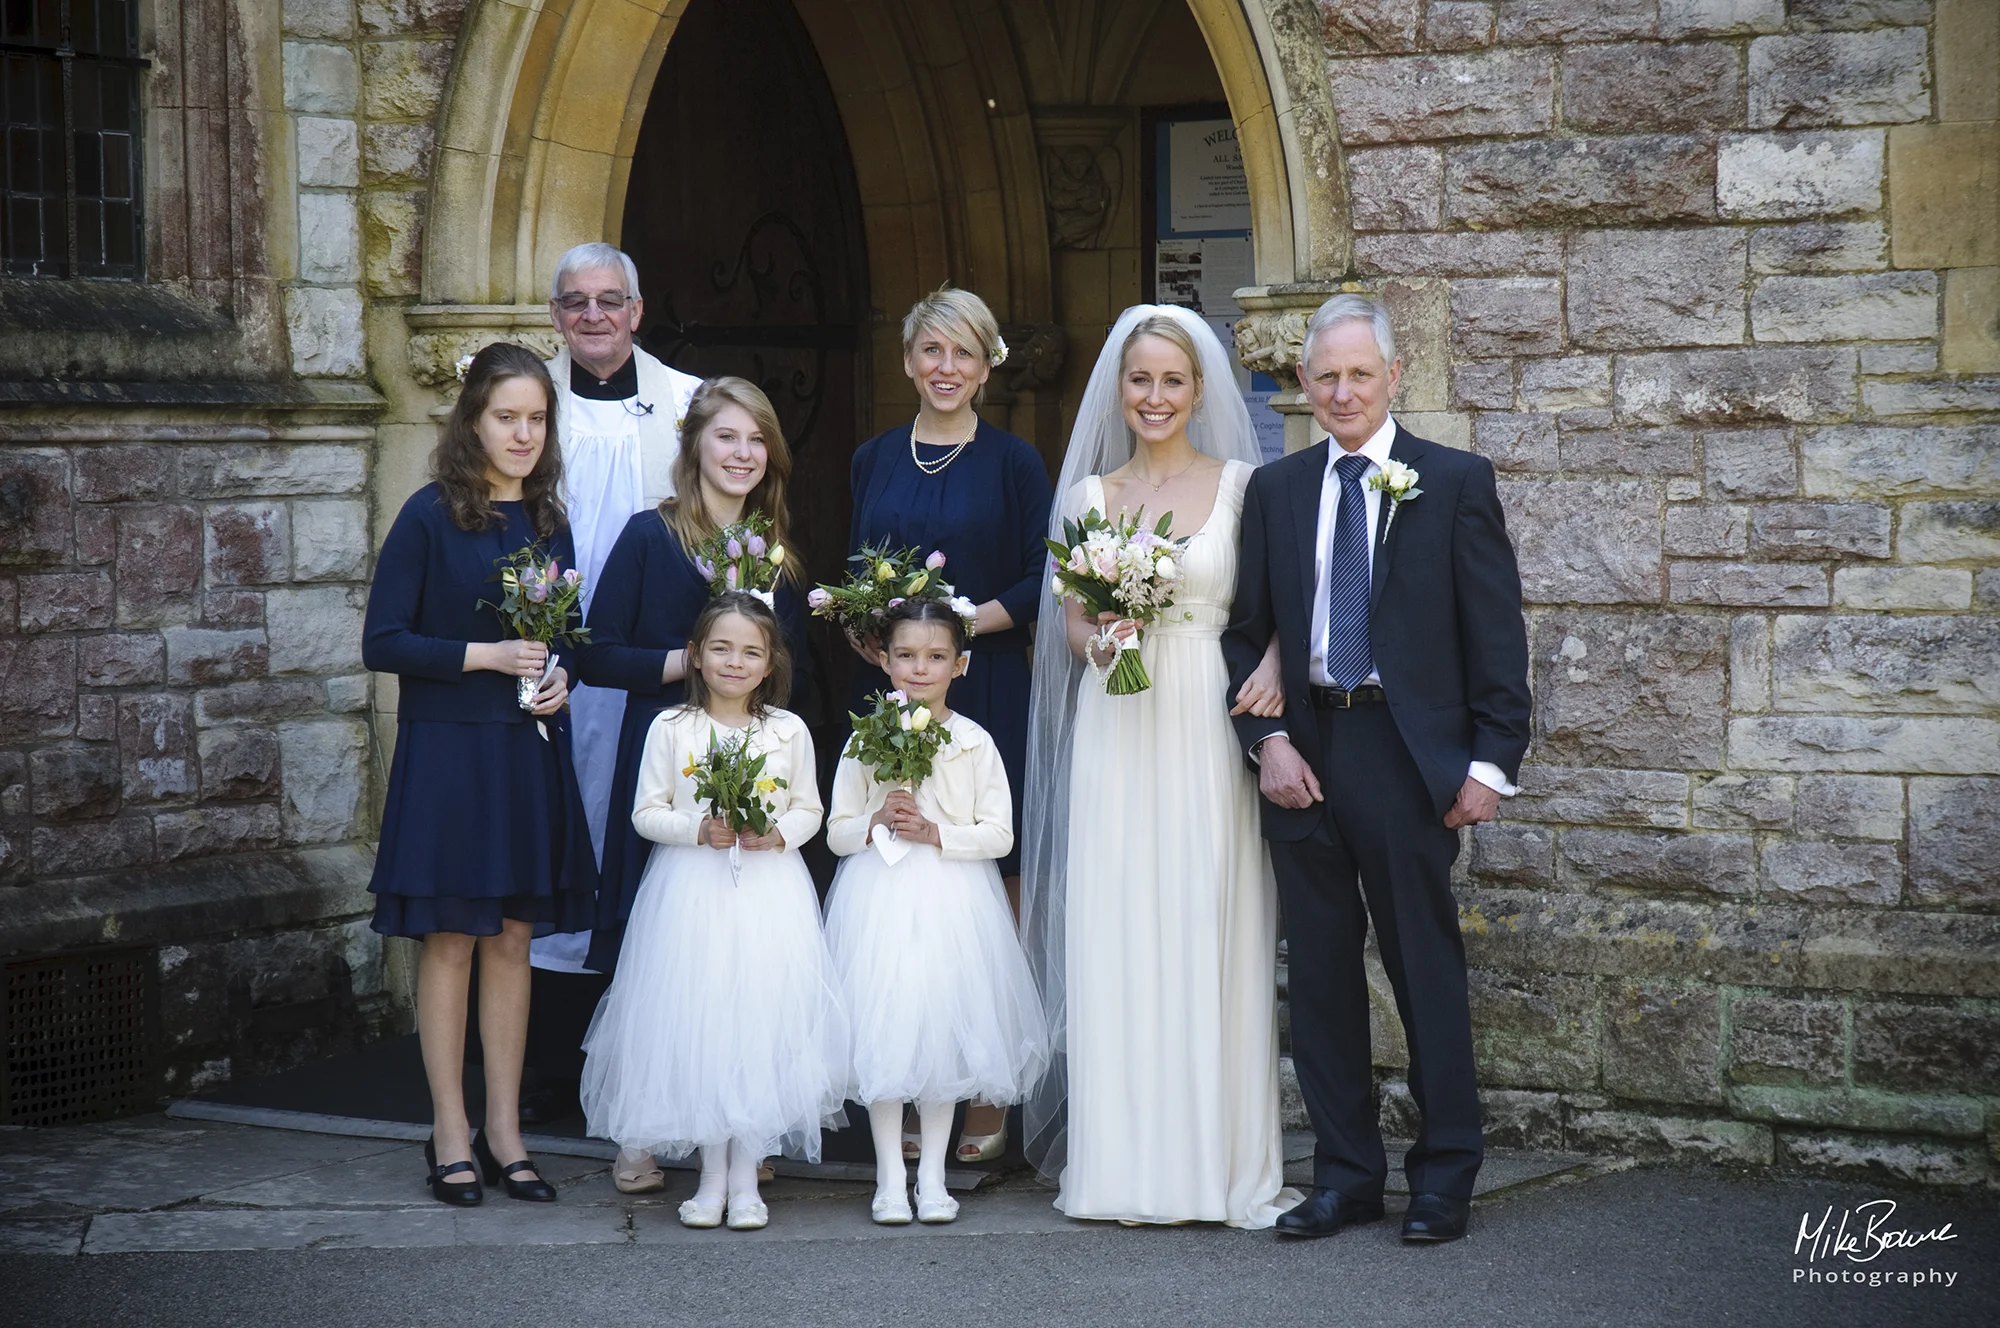 The bride with her father, bridal party and vicar in the church doorway